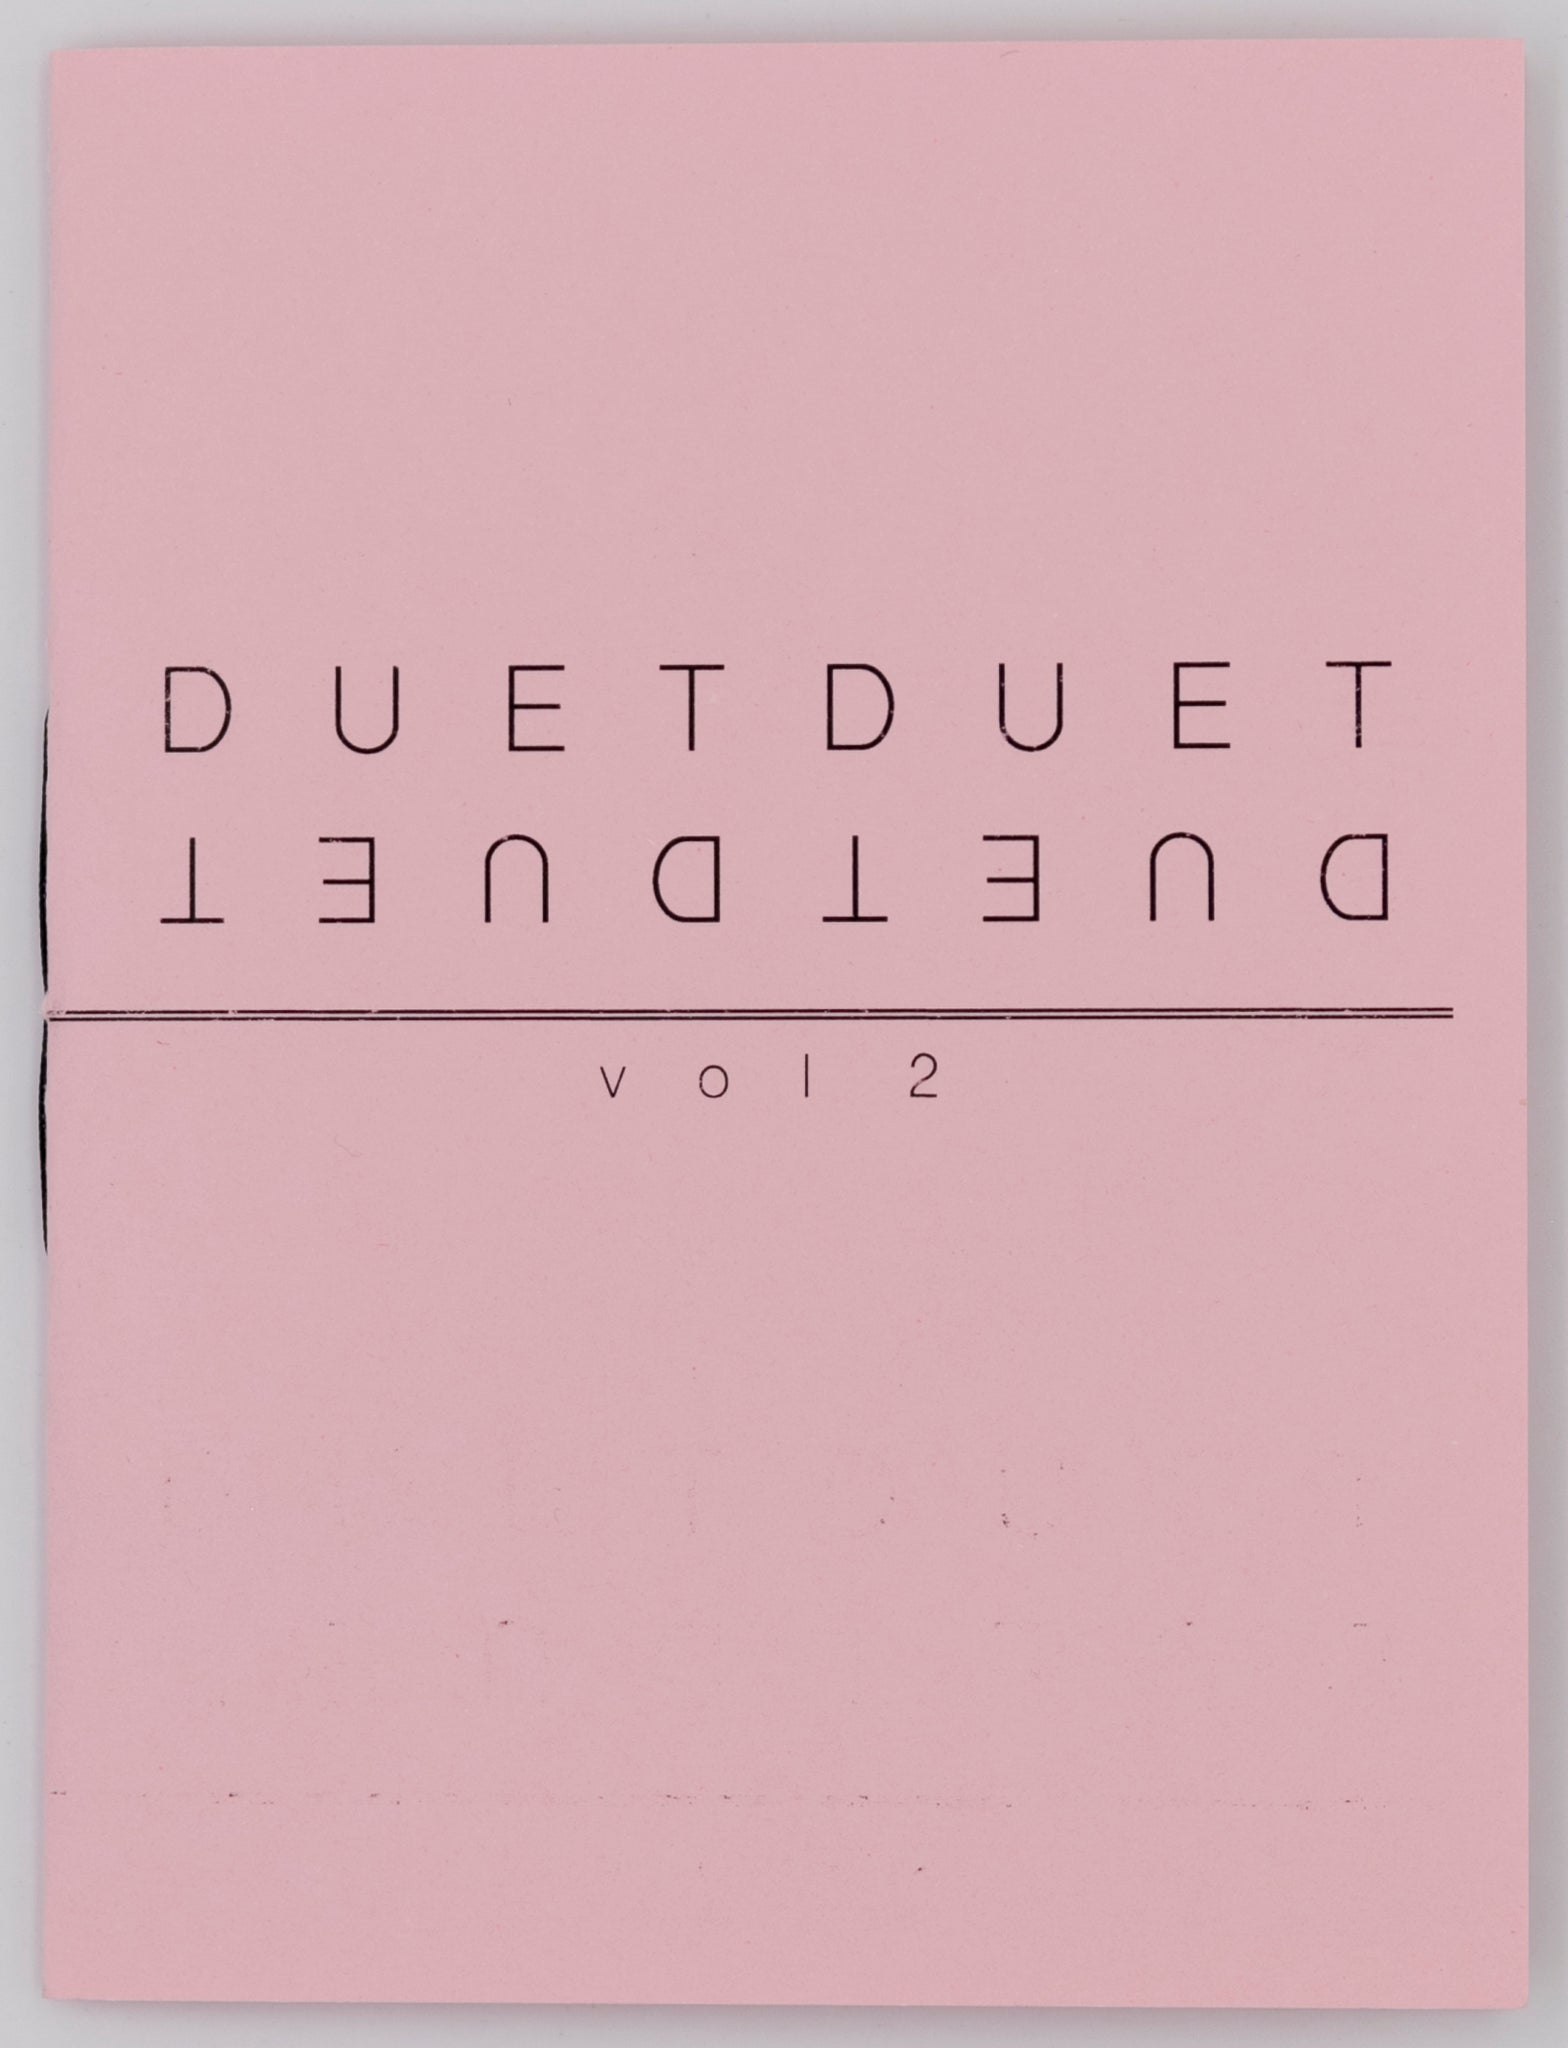 DUETDUET Vol. 2: Madge Maril and Bethany Lewis: Winter 2018